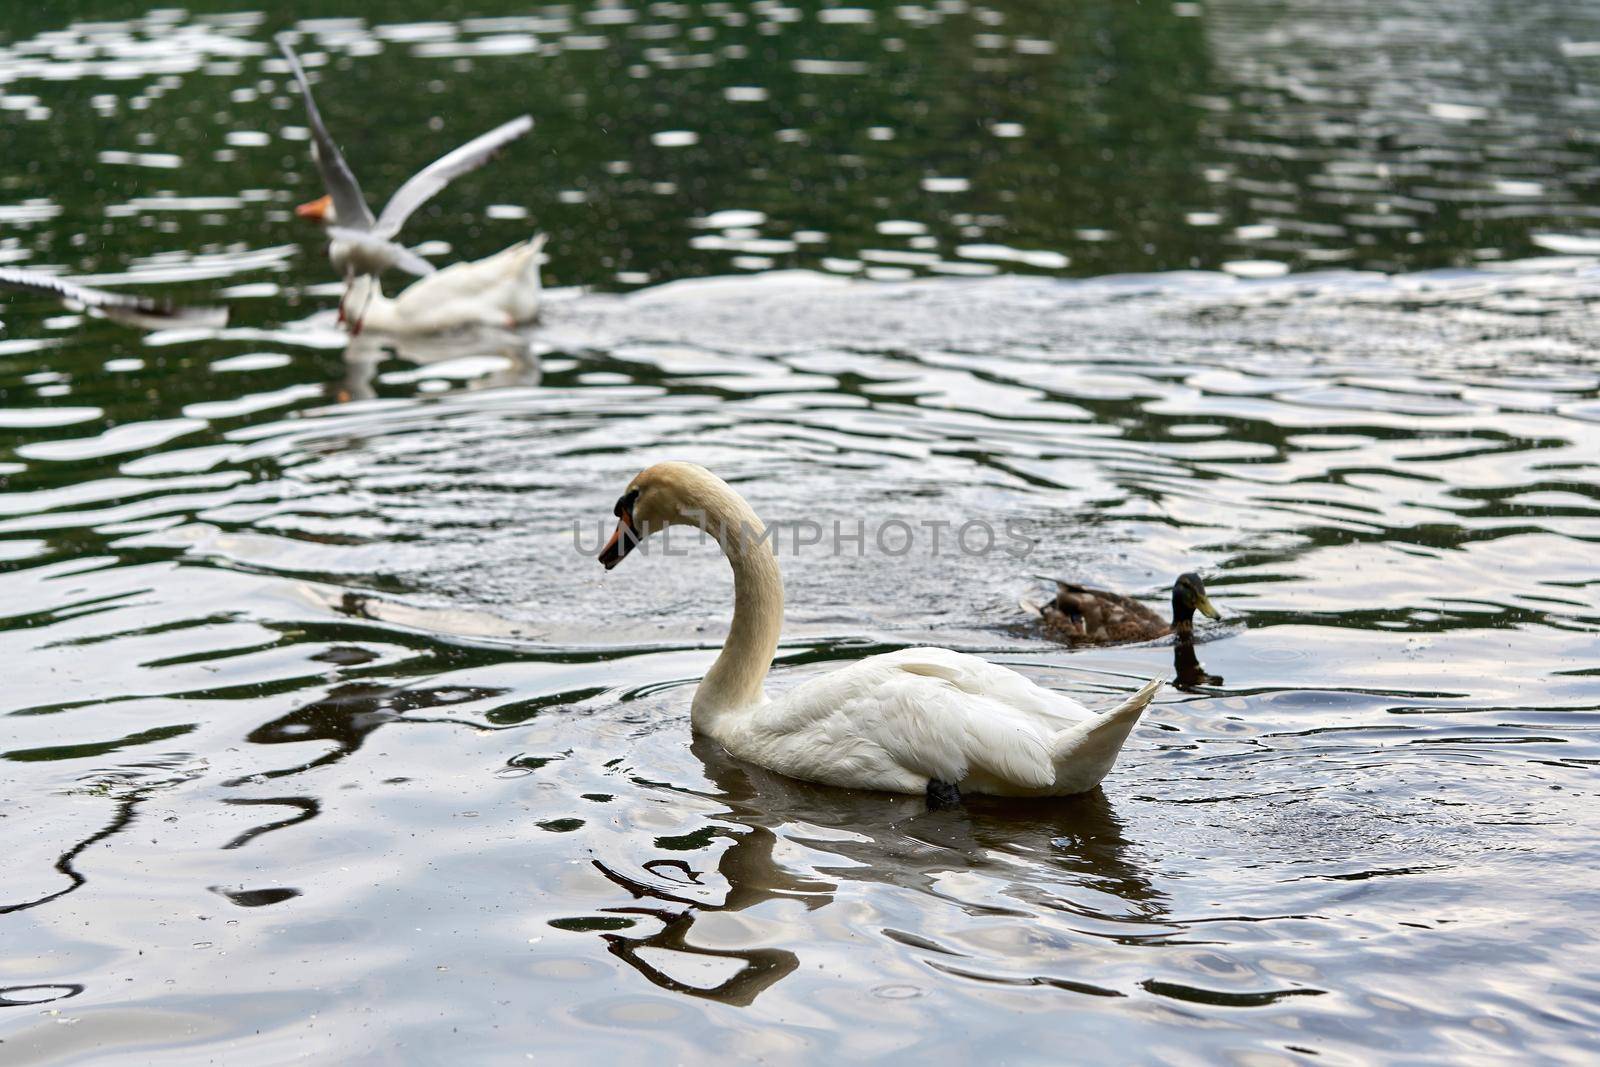 A white swan with a long neck and a red beak floats on the water. Close up